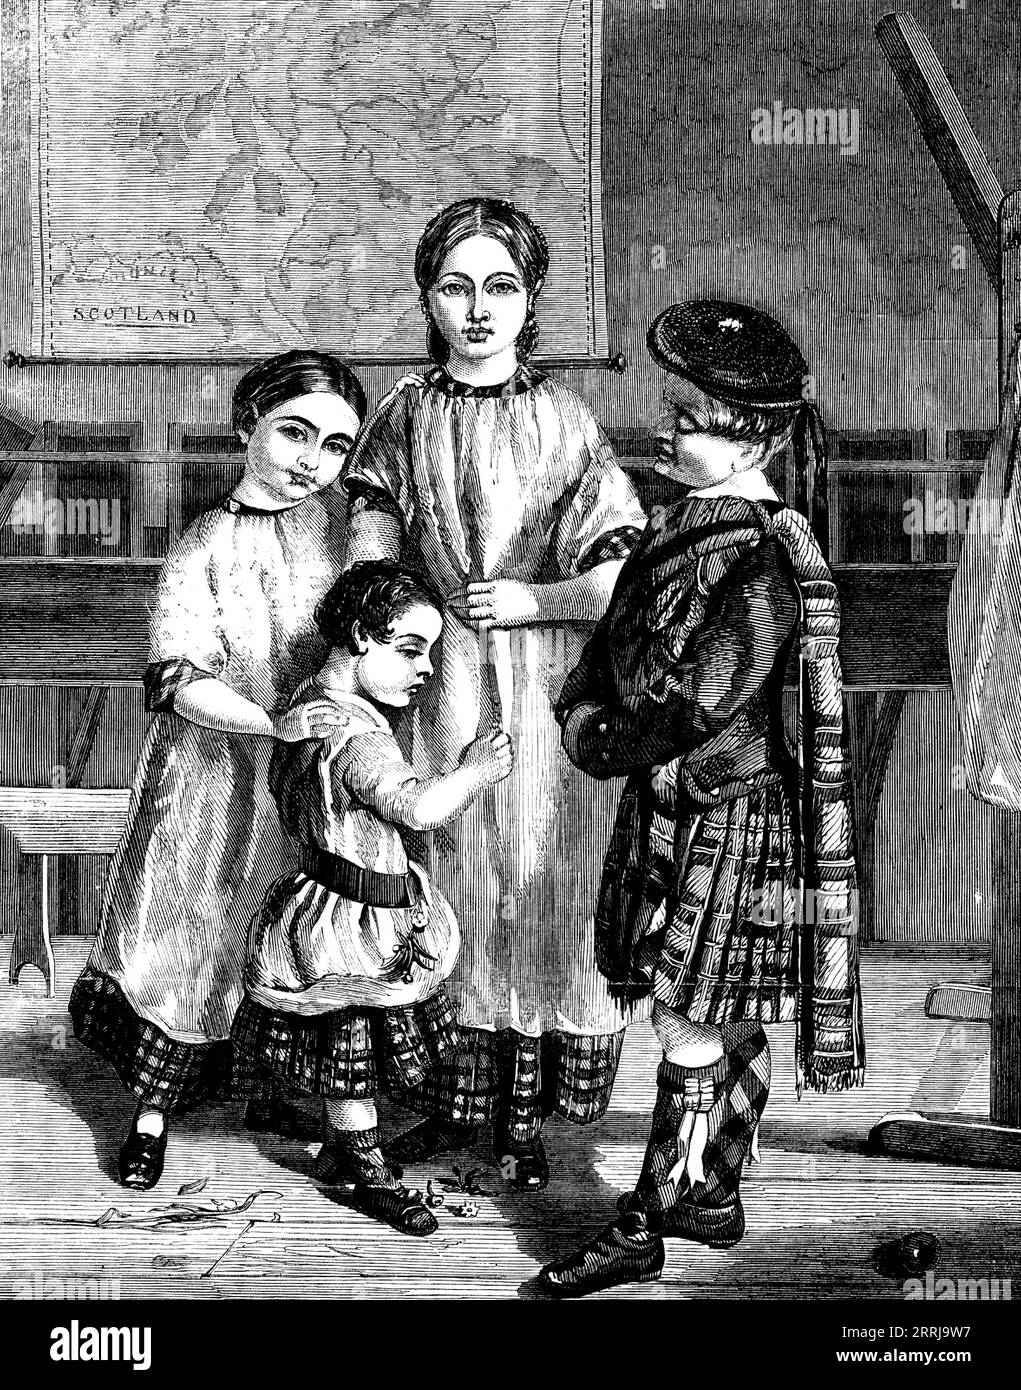 Group of Children in the Royal Caledonian Asylum [in London] - from a painting by Mr. Wighton, 1858. 'The object of the institution is the maintenance and education of the children of soldiers, sailors, and marines, natives of Scotland, who have either died or been disabled in the service of their country...At present there are sixty-seven boys and forty-nine girls in the asylum, many of whom are the sons and daughters of the brave Scottish soldiers who so nobly fought and died during the late Russian war...There is here represented a very touching picture of a little orphan boy, about five ye Stock Photo